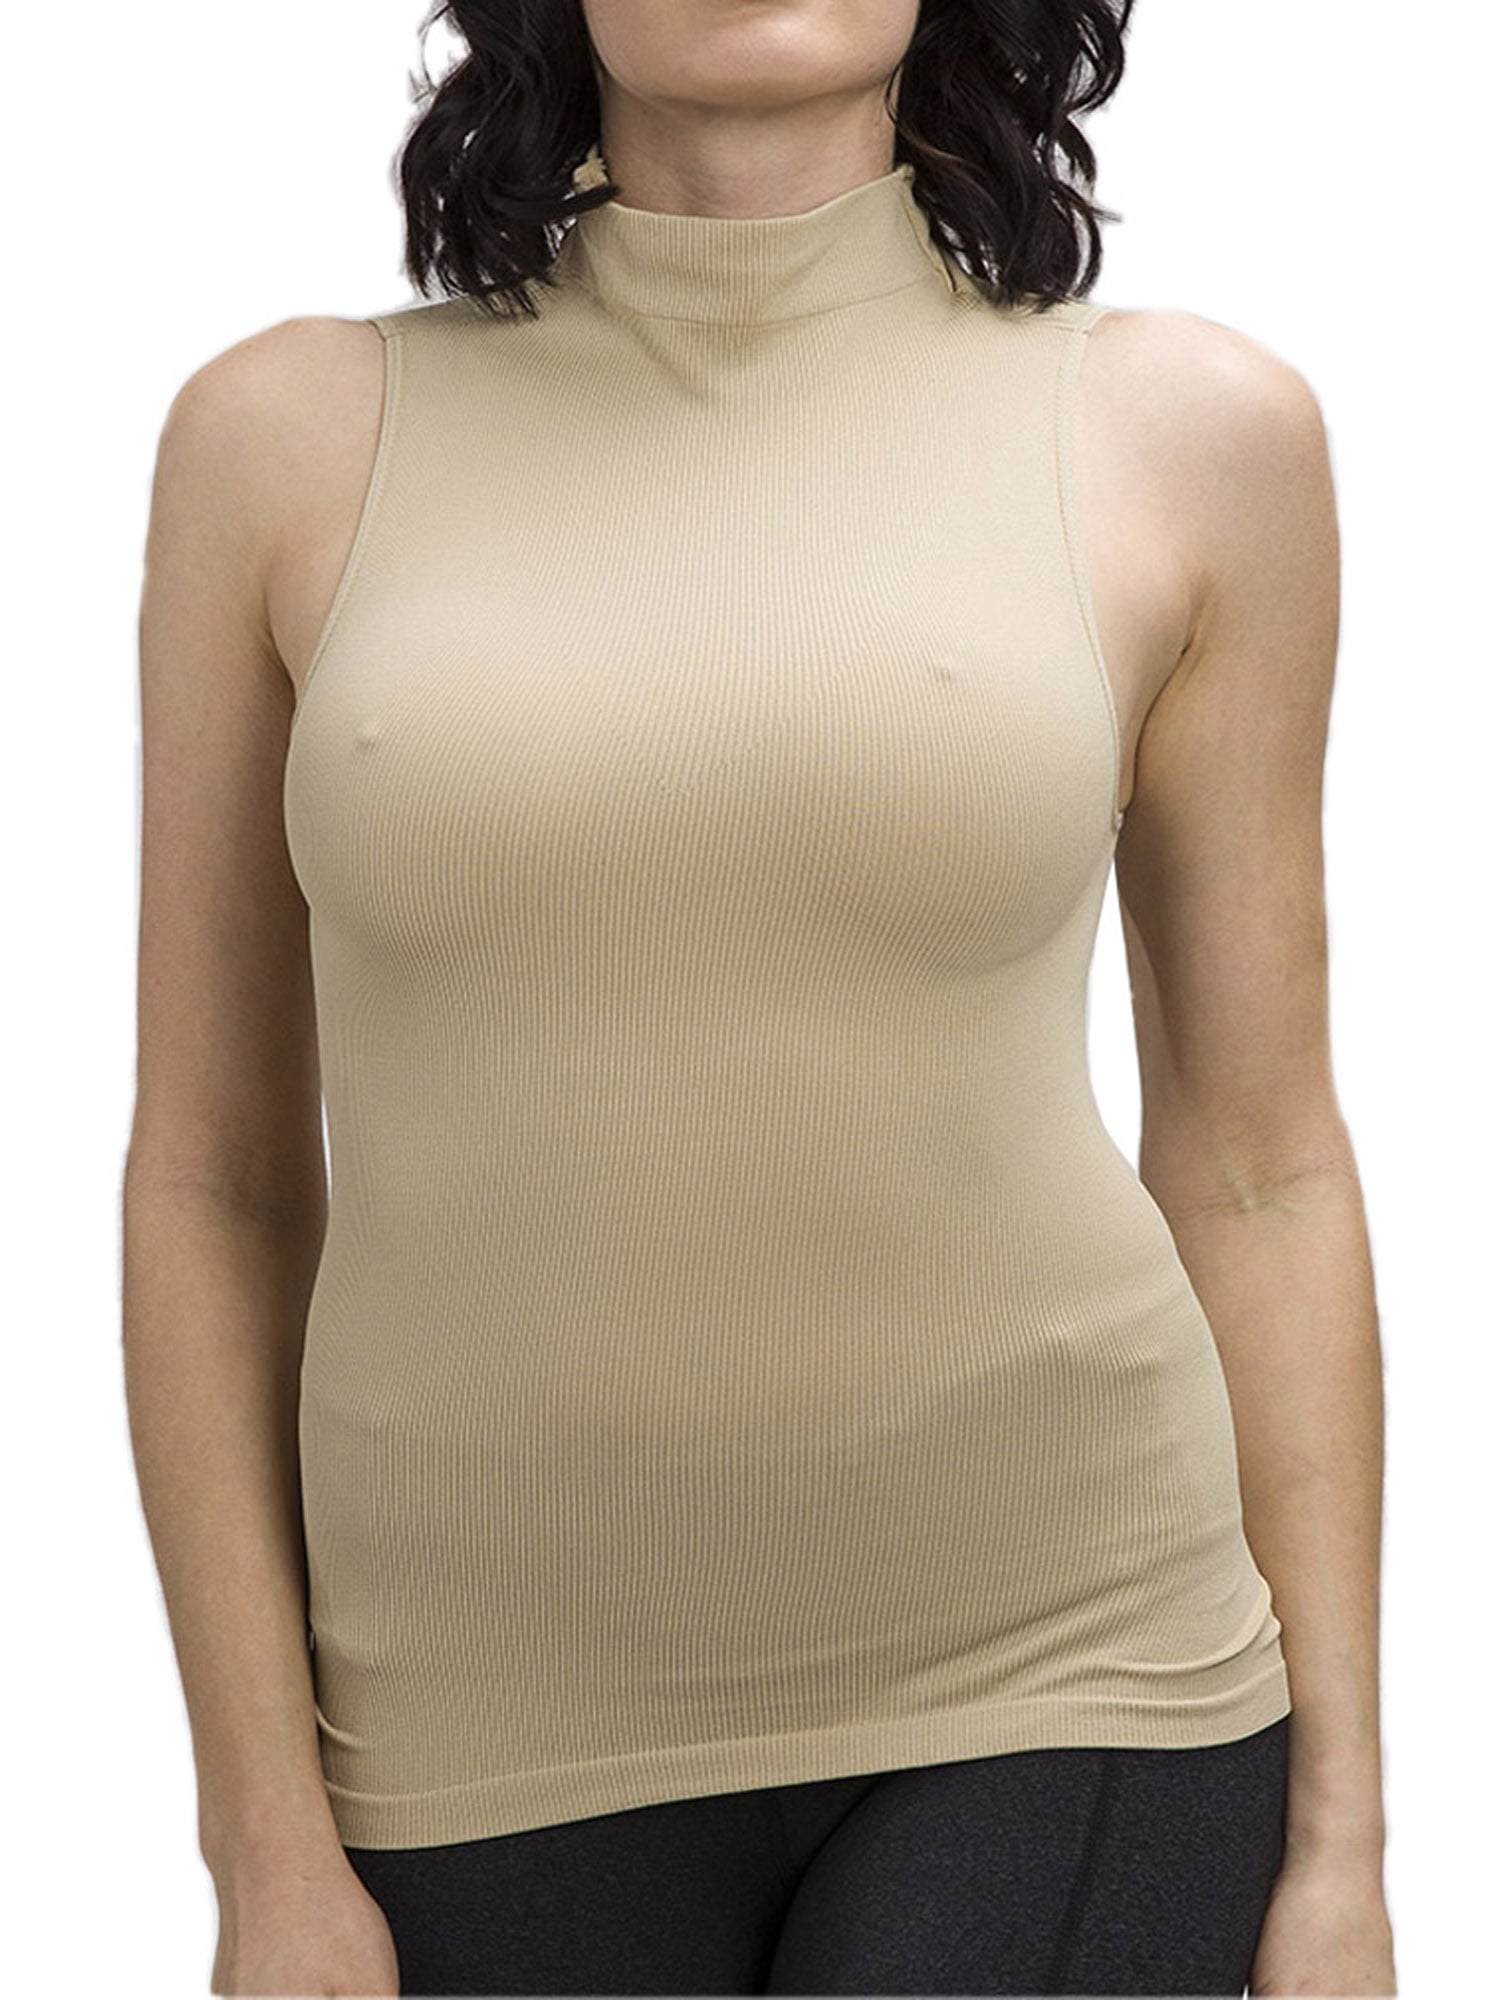 Women Sleeveless Mock Neck Turtleneck Body Shaping Tank Top Slim Fitted All Ribbed Shirt Fits